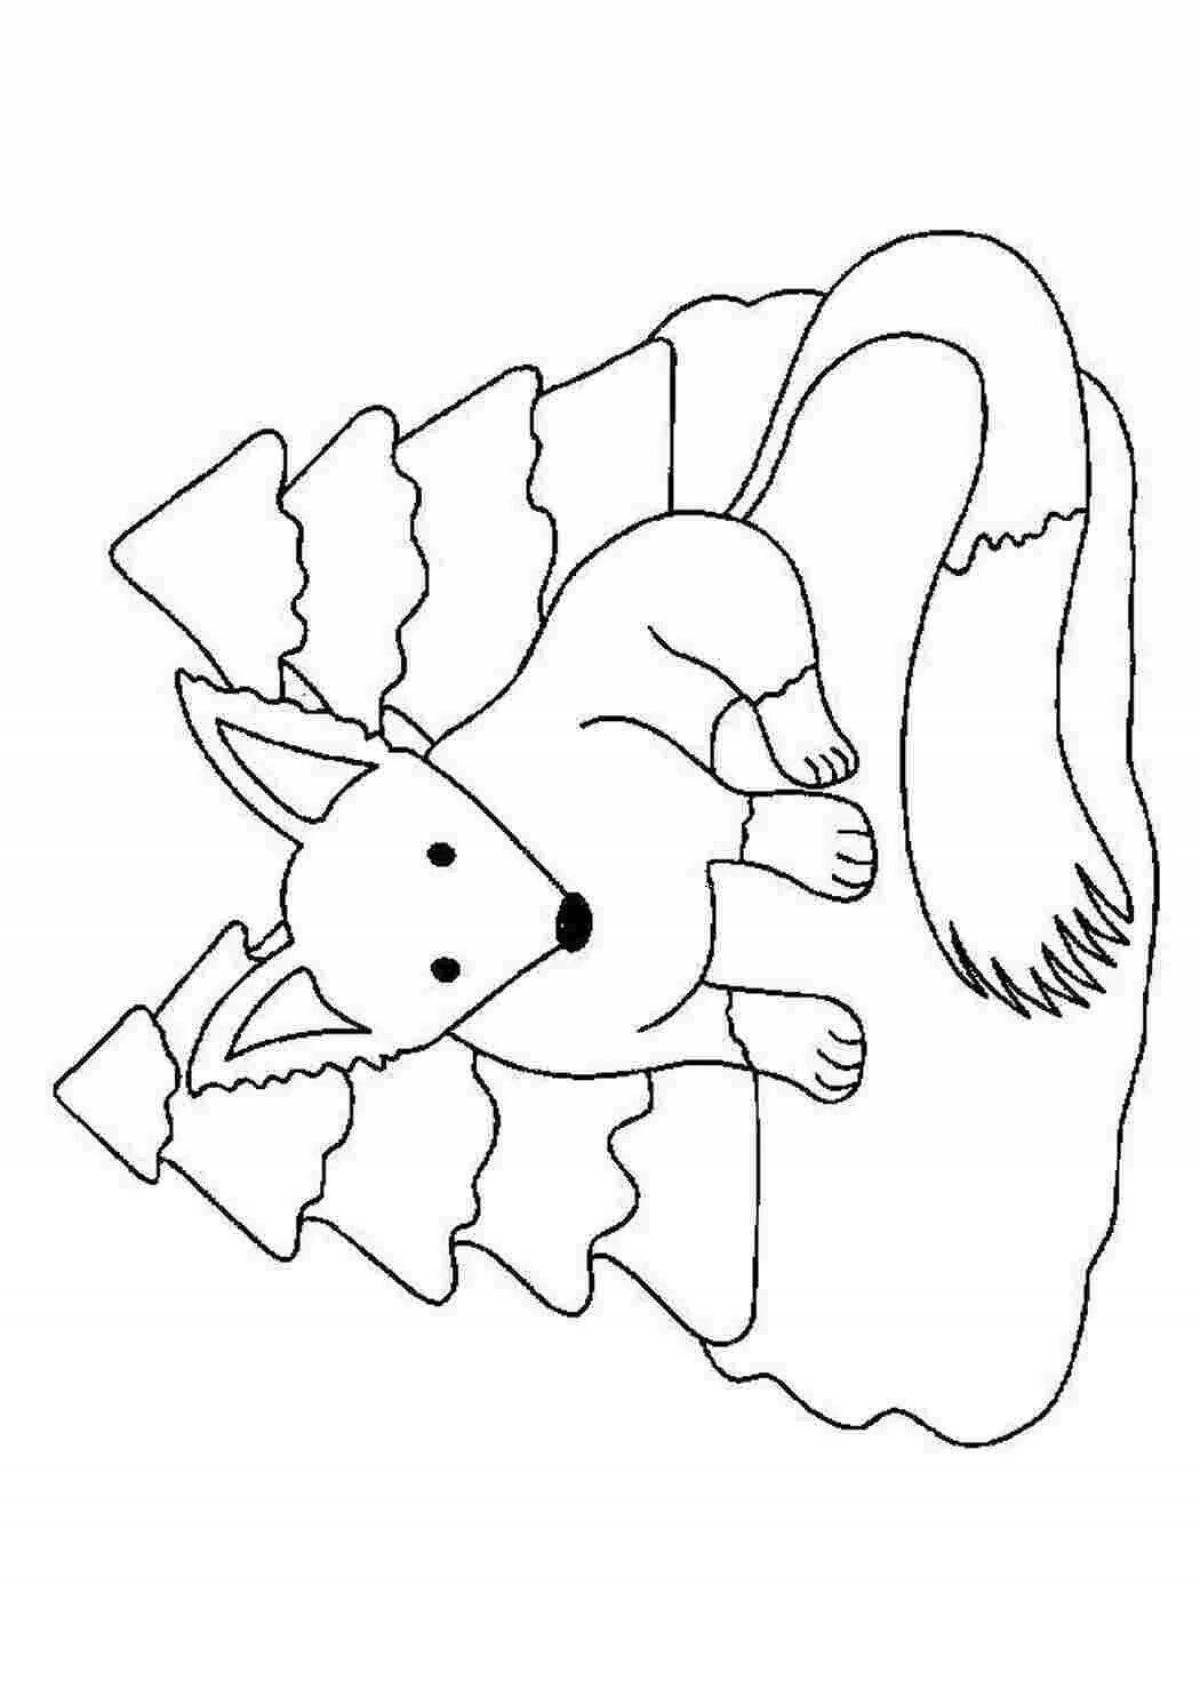 Charming fox in winter coloring book